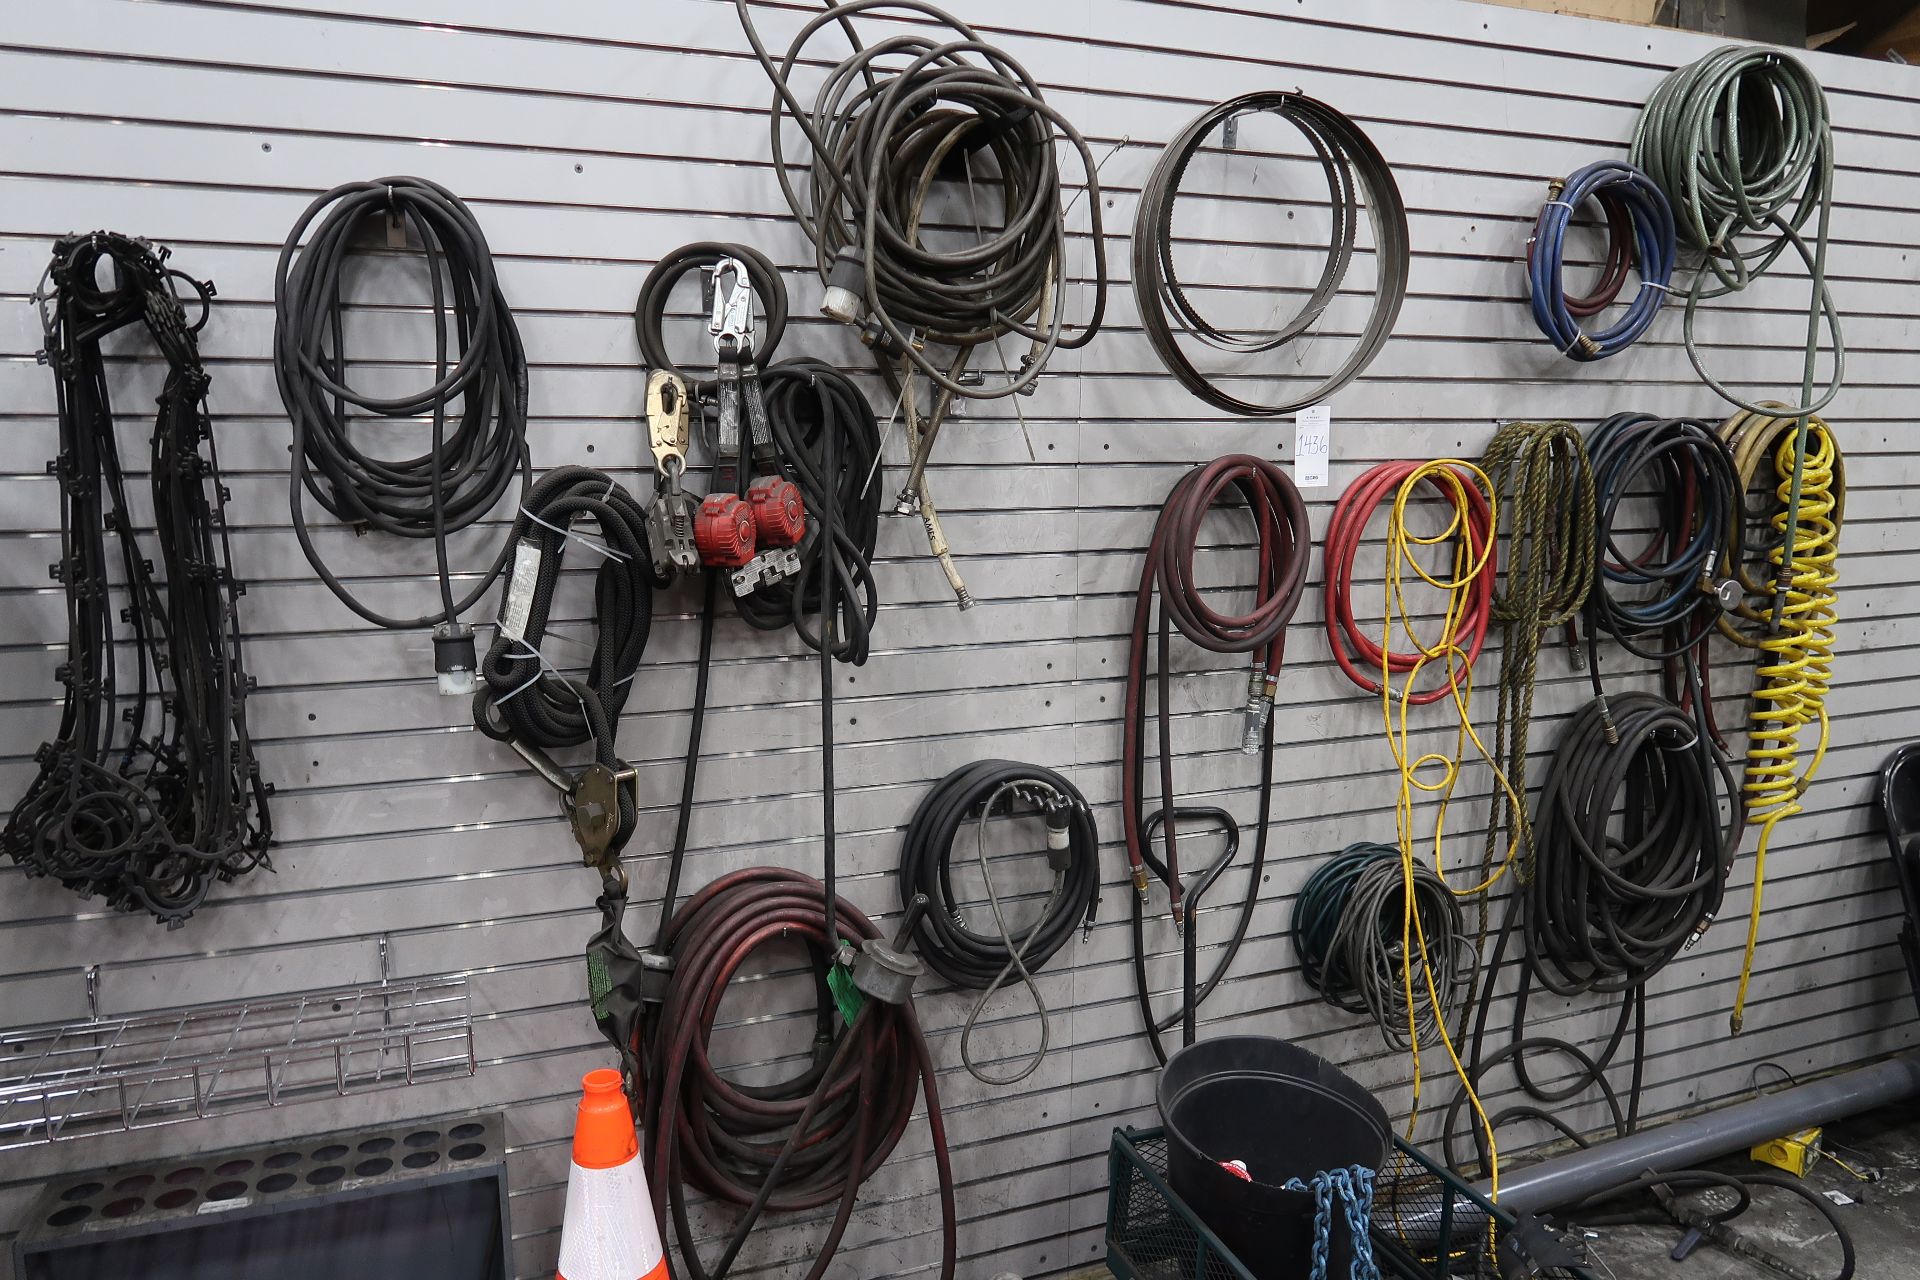 Come alongs, chain, belts and hoses, cones